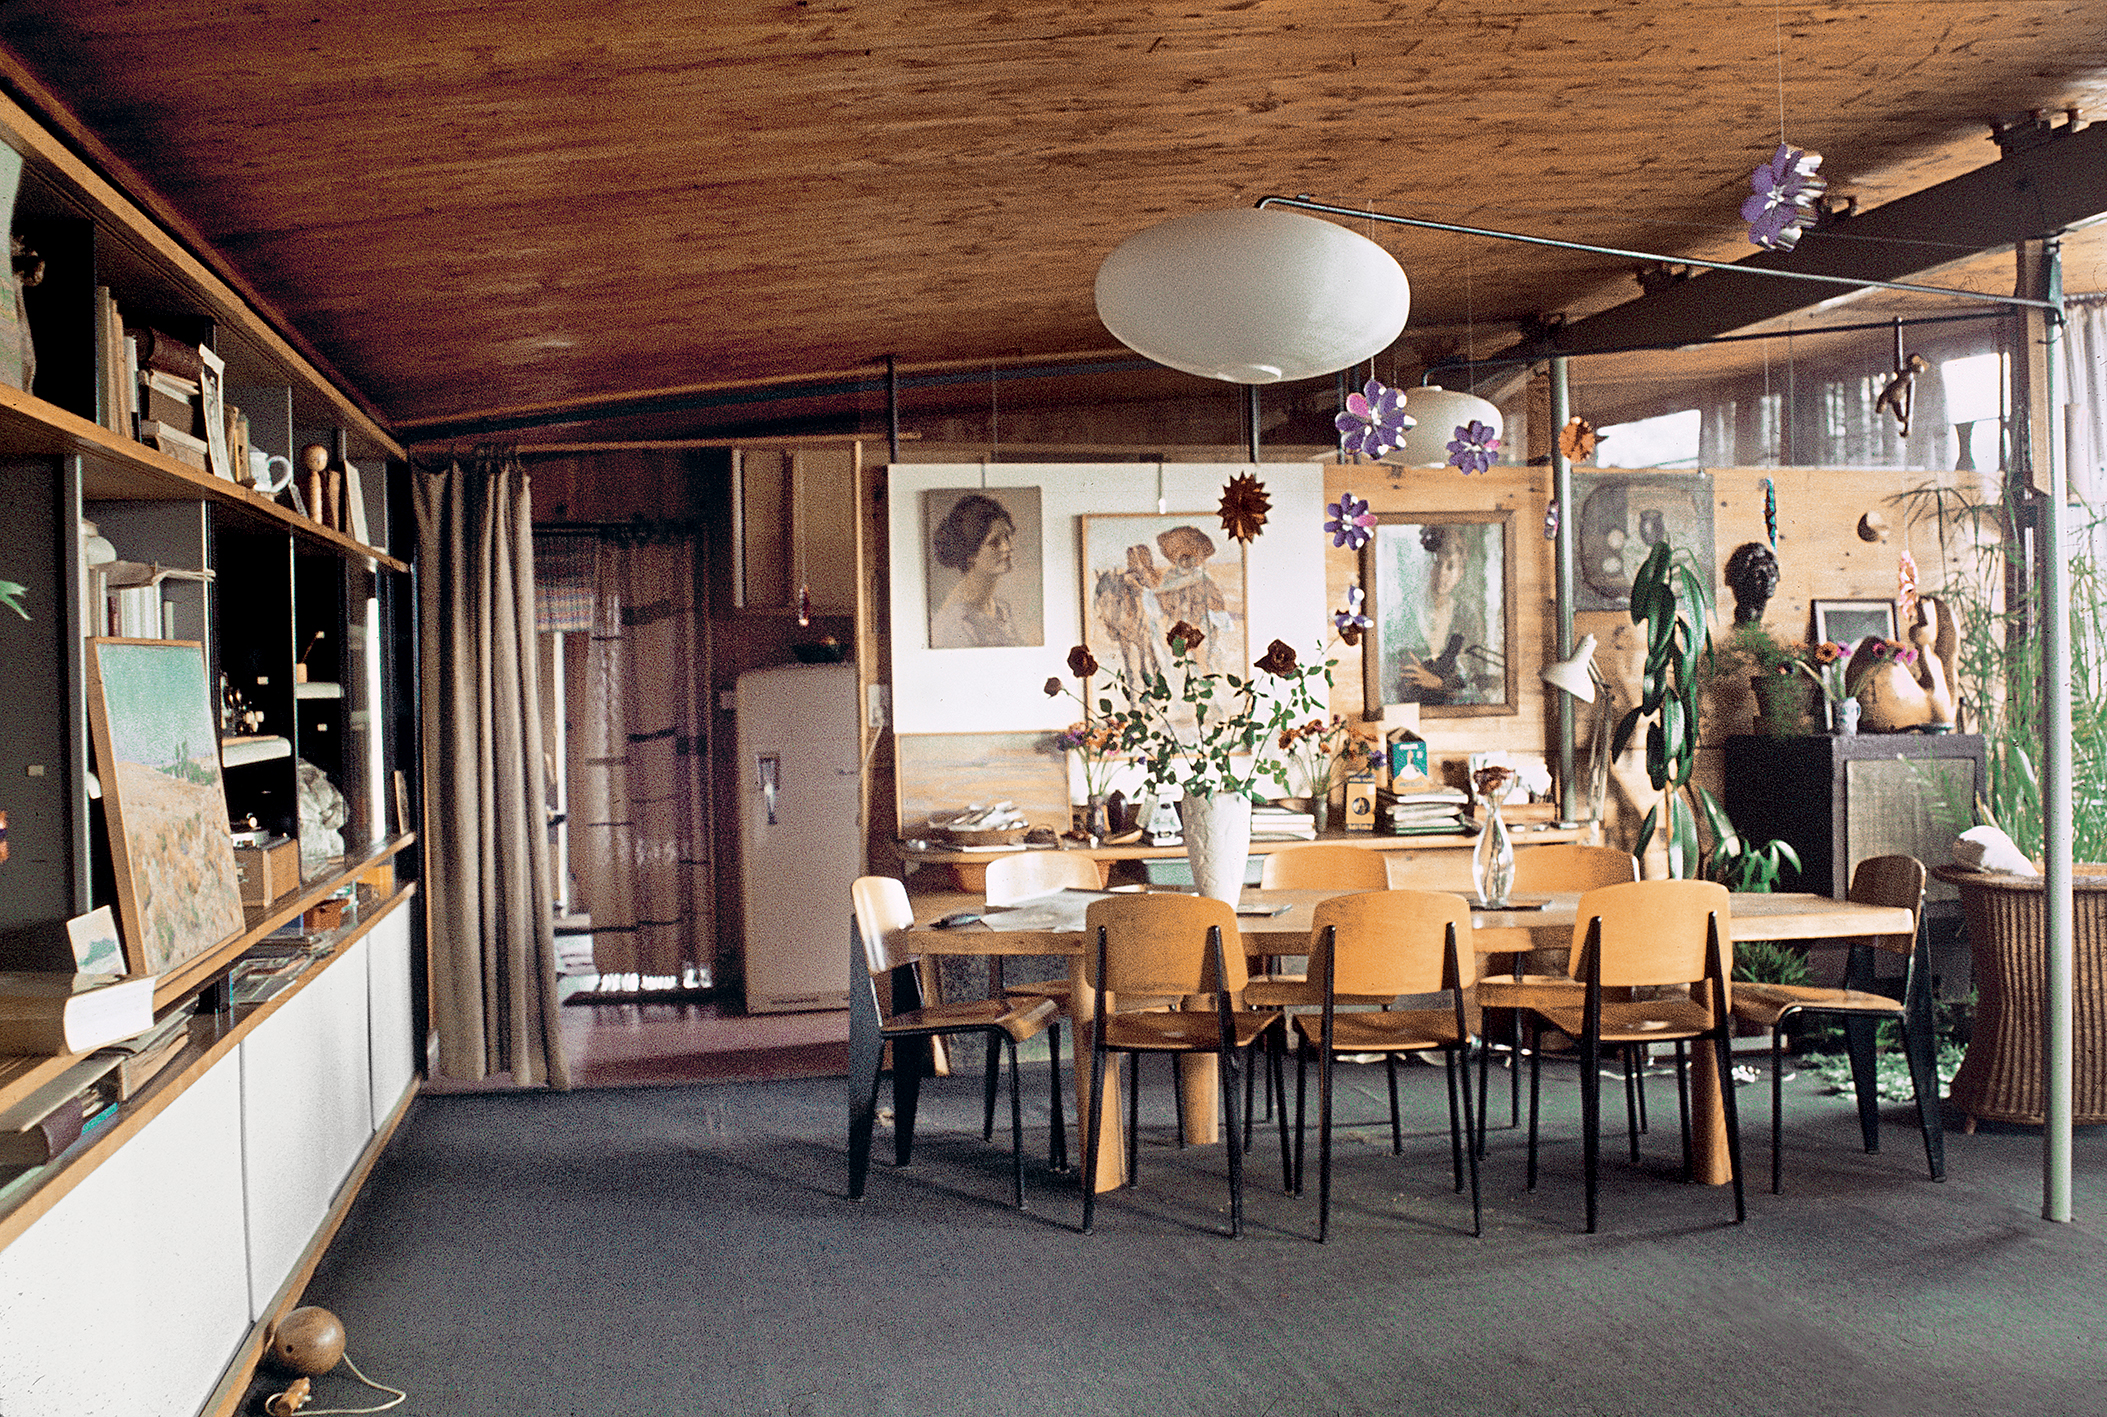 The Jean Prouvé house. The dining area furnished with a table specially designed by Pierre Jeanneret in 1943, Métropole no. 305 chairs and an adjustable swing-jib lamp. Le Haut-du-Lièvre, Nancy, ca. 1955